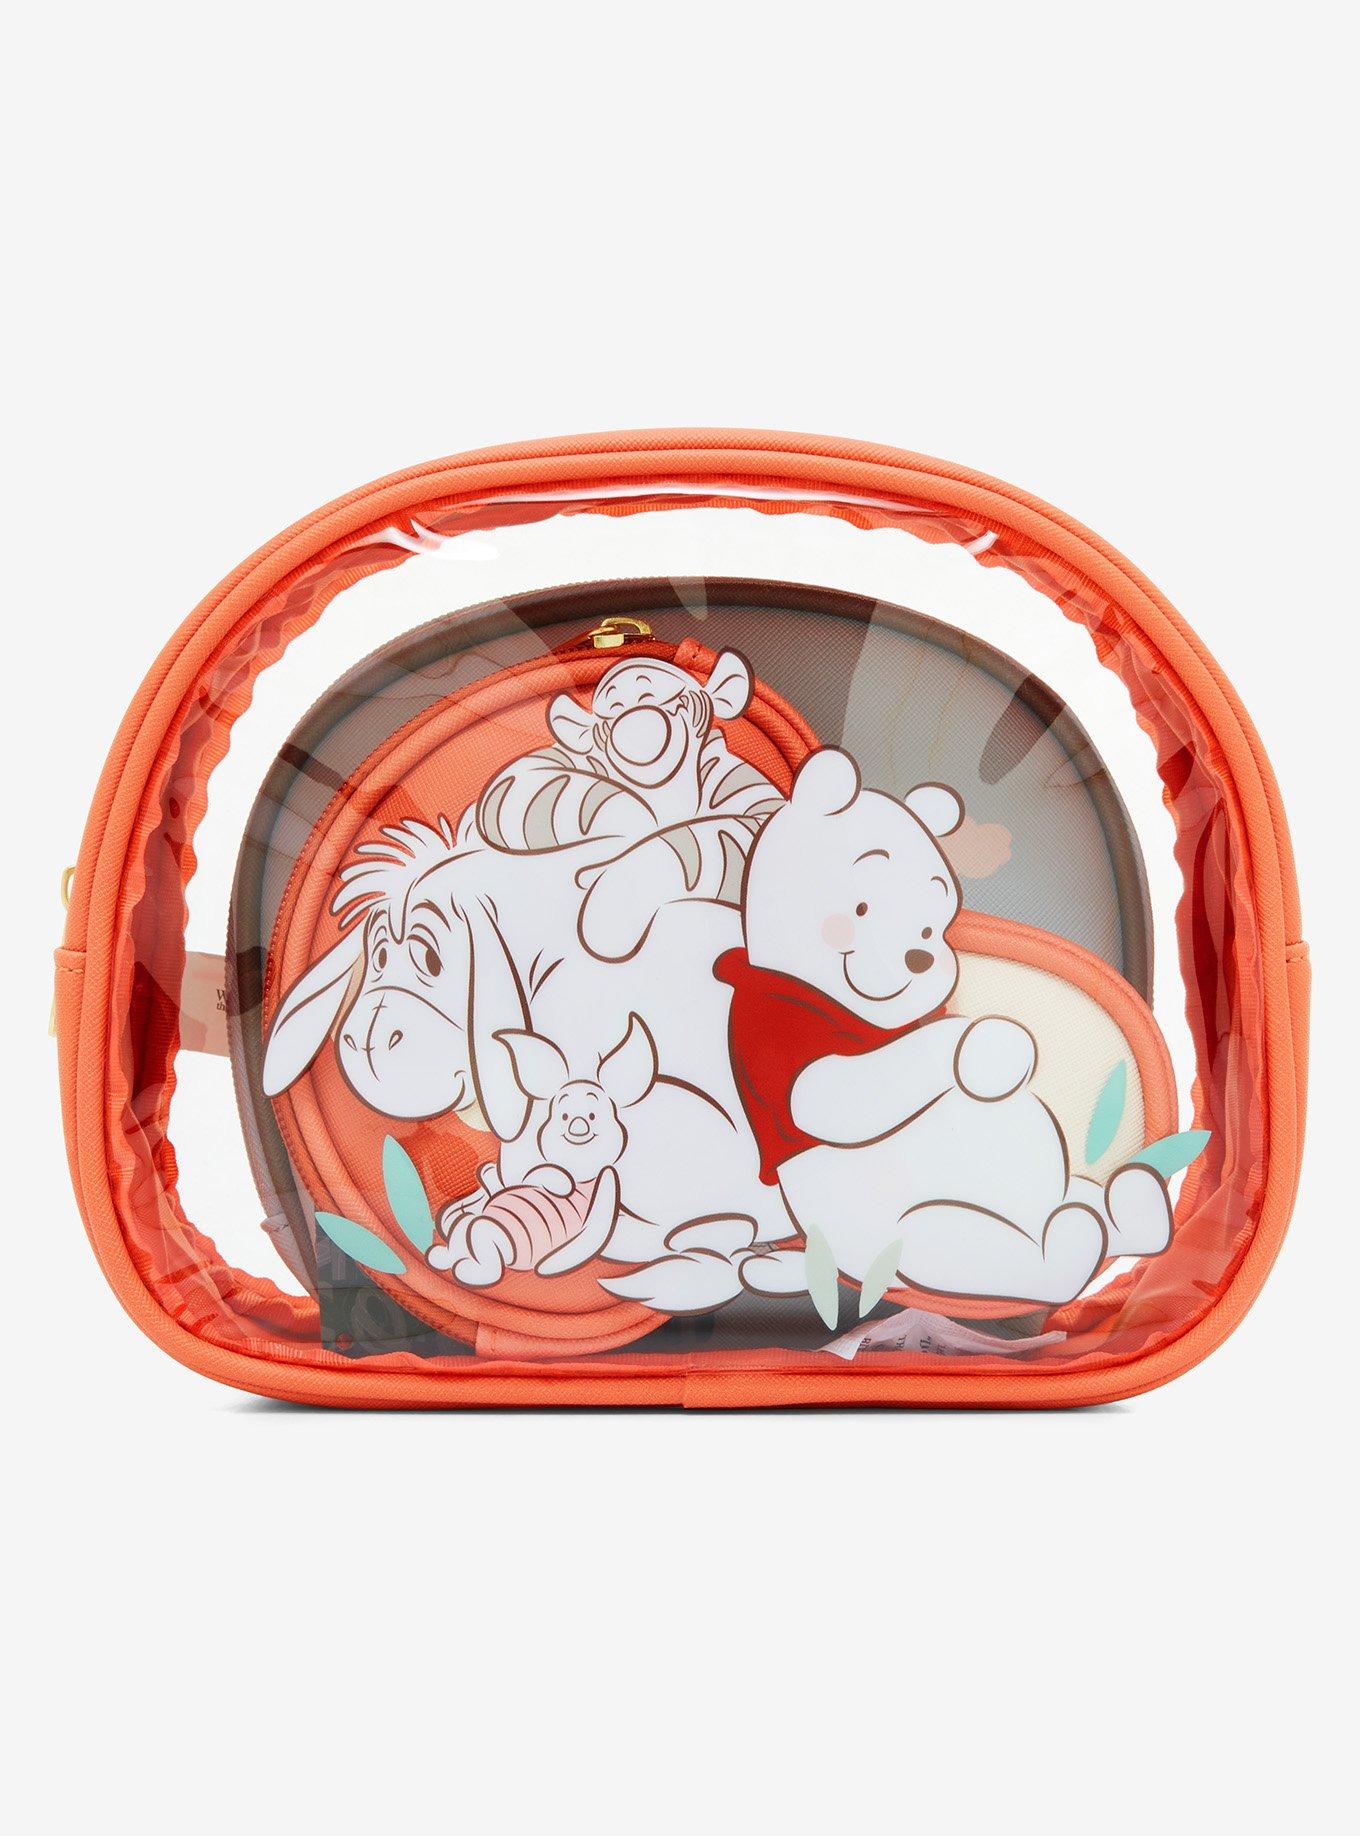 Disney Winnie the Pooh Oh Bother Kitchen Set - BoxLunch Exclusive